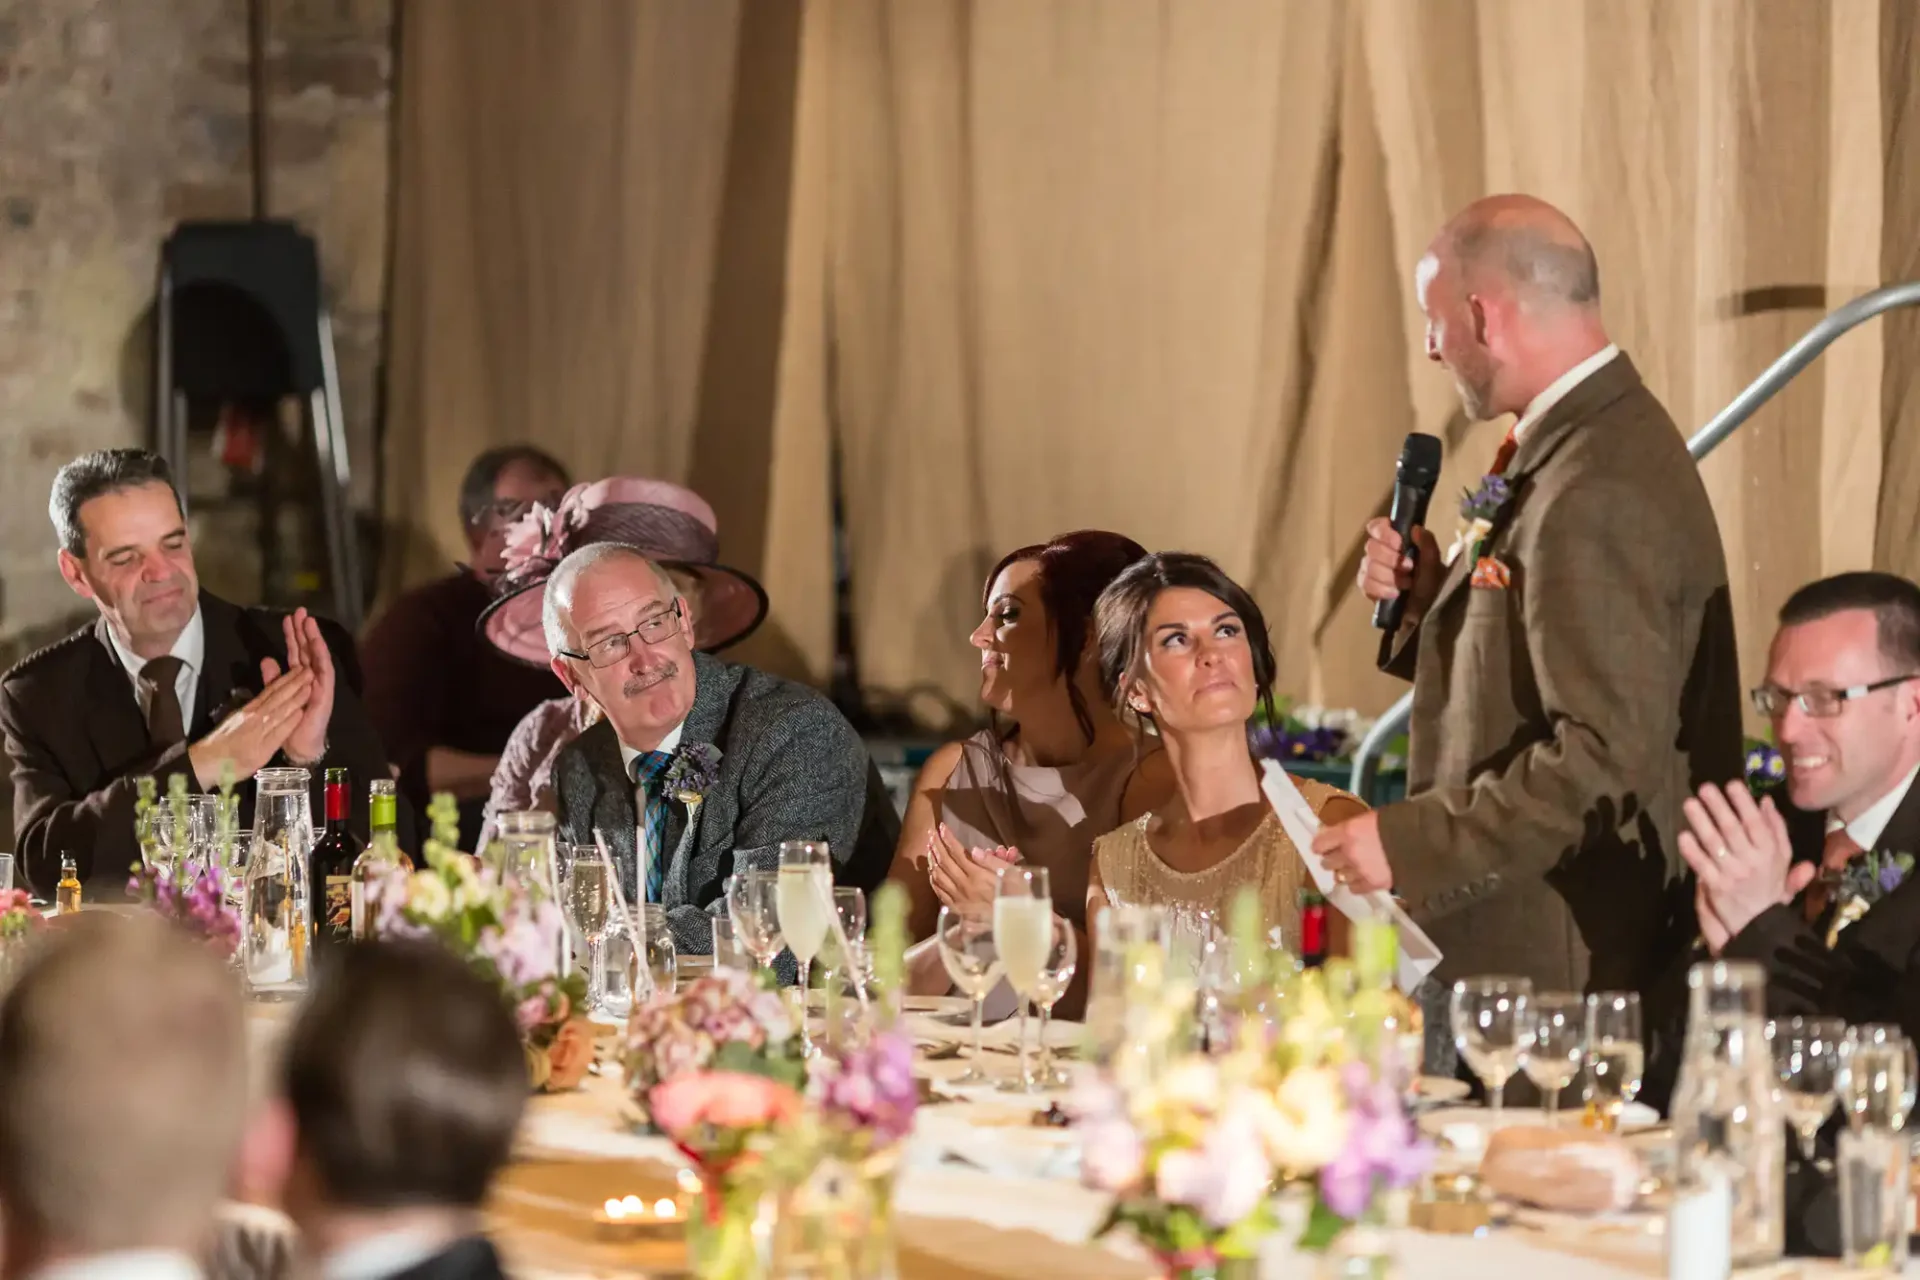 A man gives a speech at a wedding reception, holding a microphone, with guests seated at a table listening attentively, some clapping.